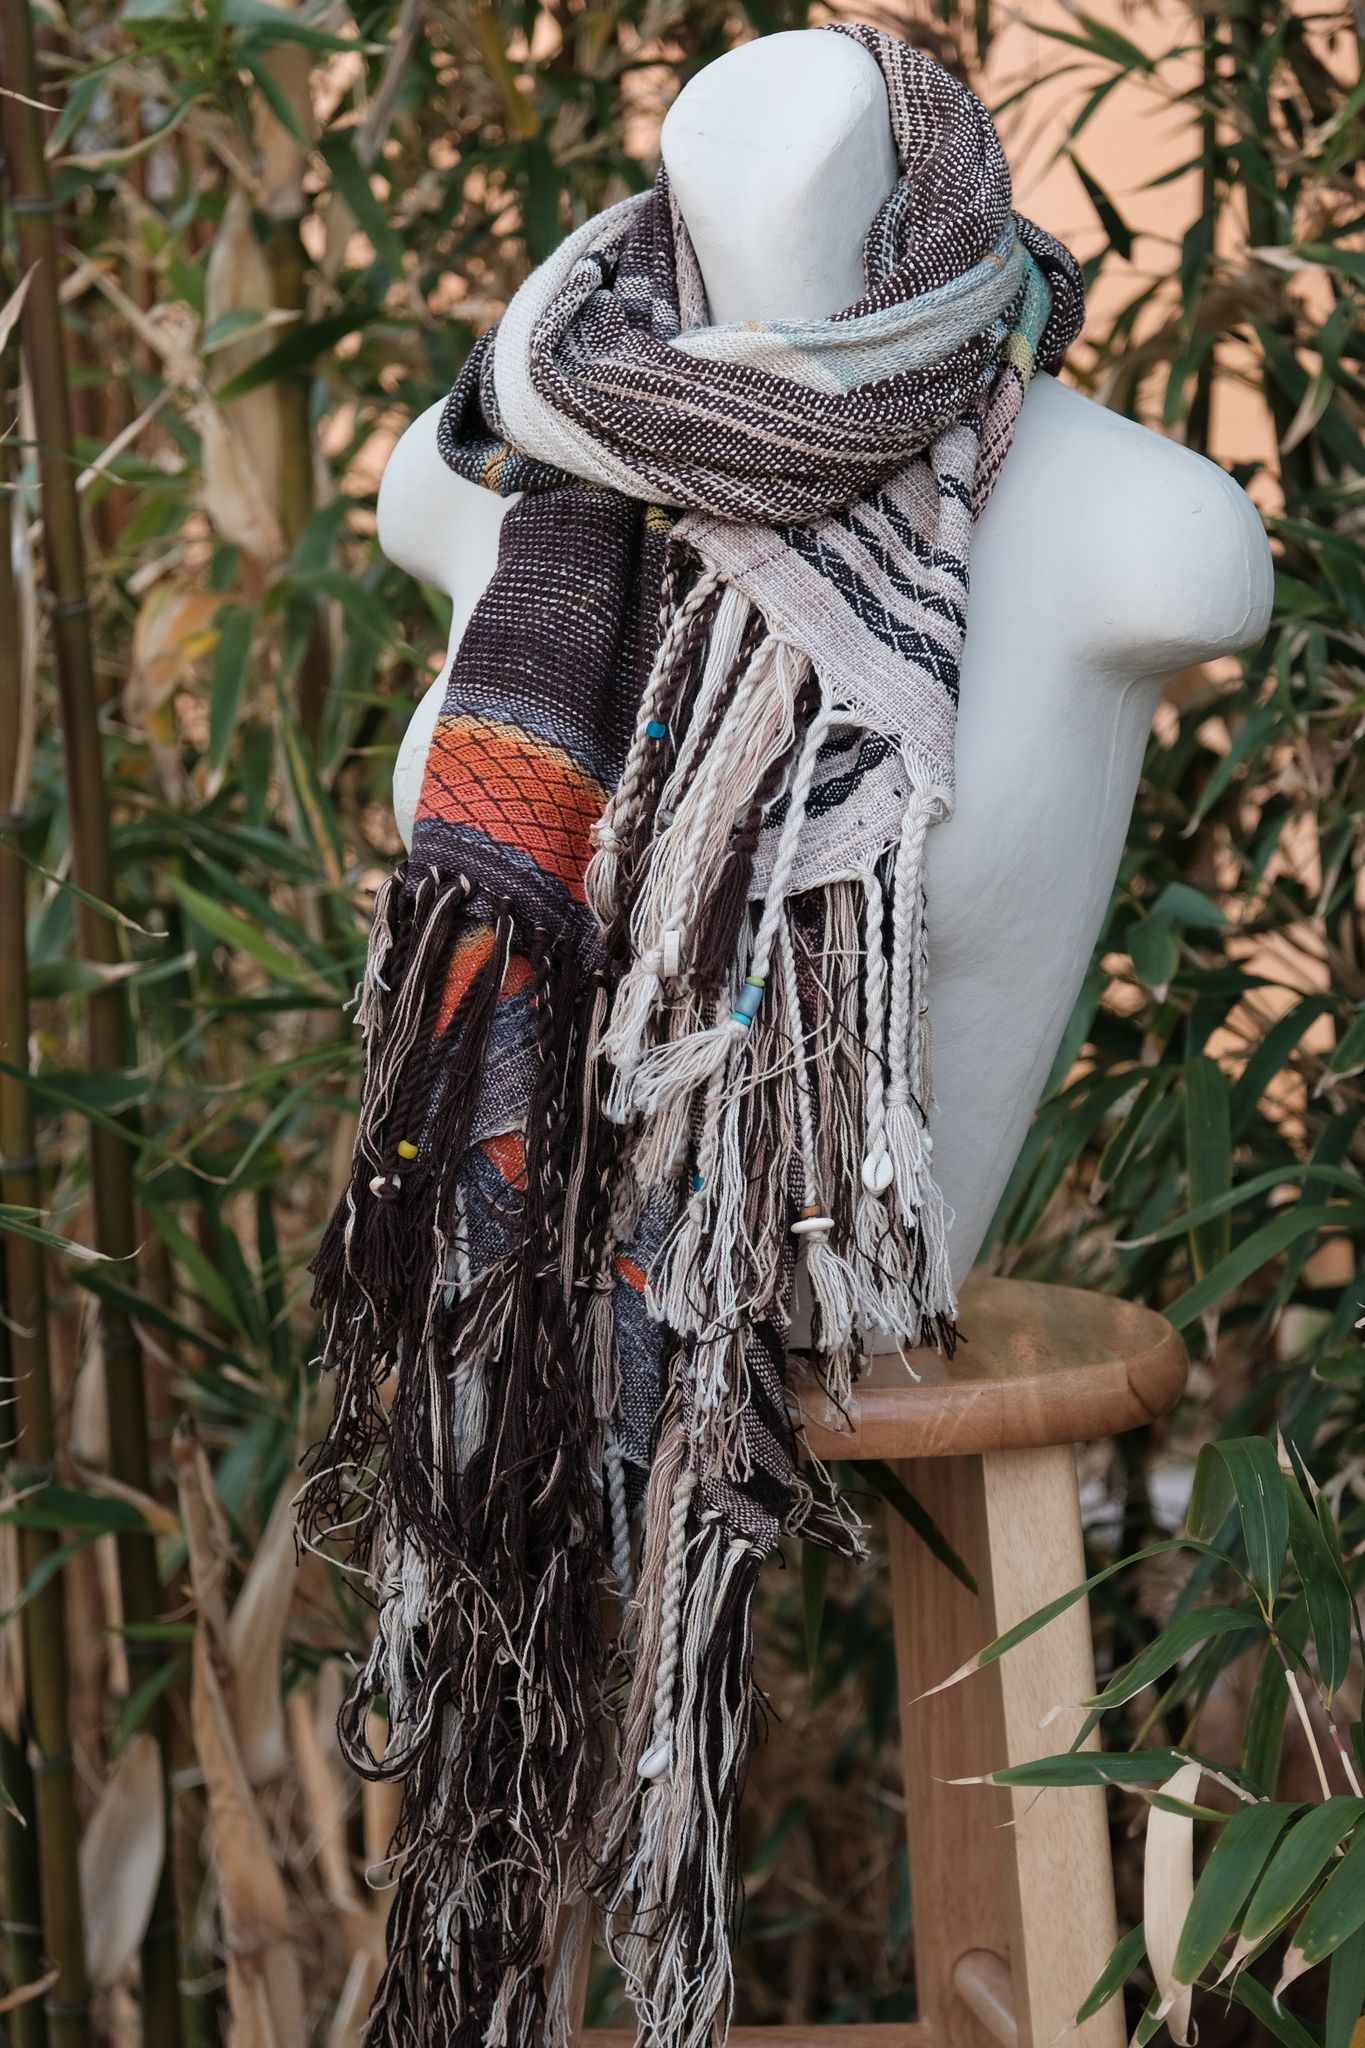 Handwoven raw silk etherial scarf in teal, blue, orange and dusty pink on a white mannequin in a garden